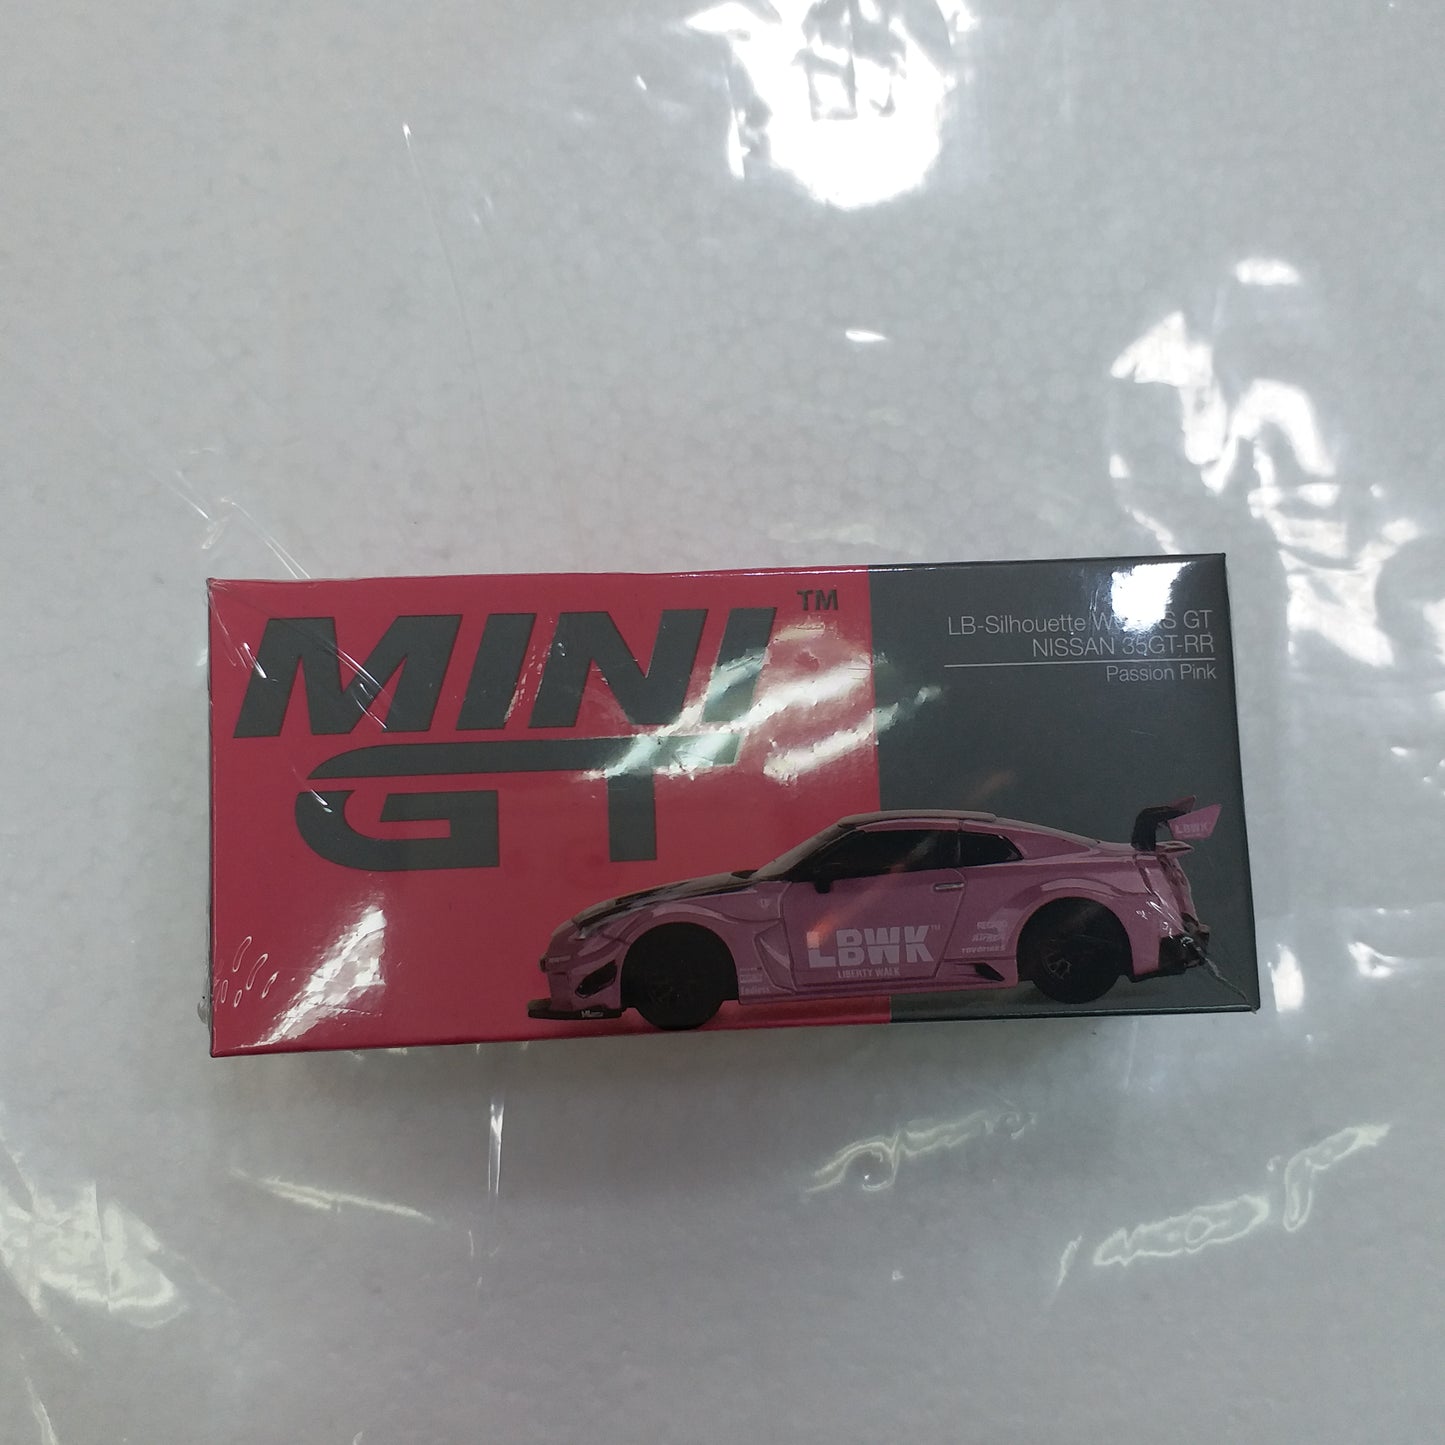 MINI GT #418 Lb-Sihouette WORKS GT Nissan 35GT-RR Passion Pink